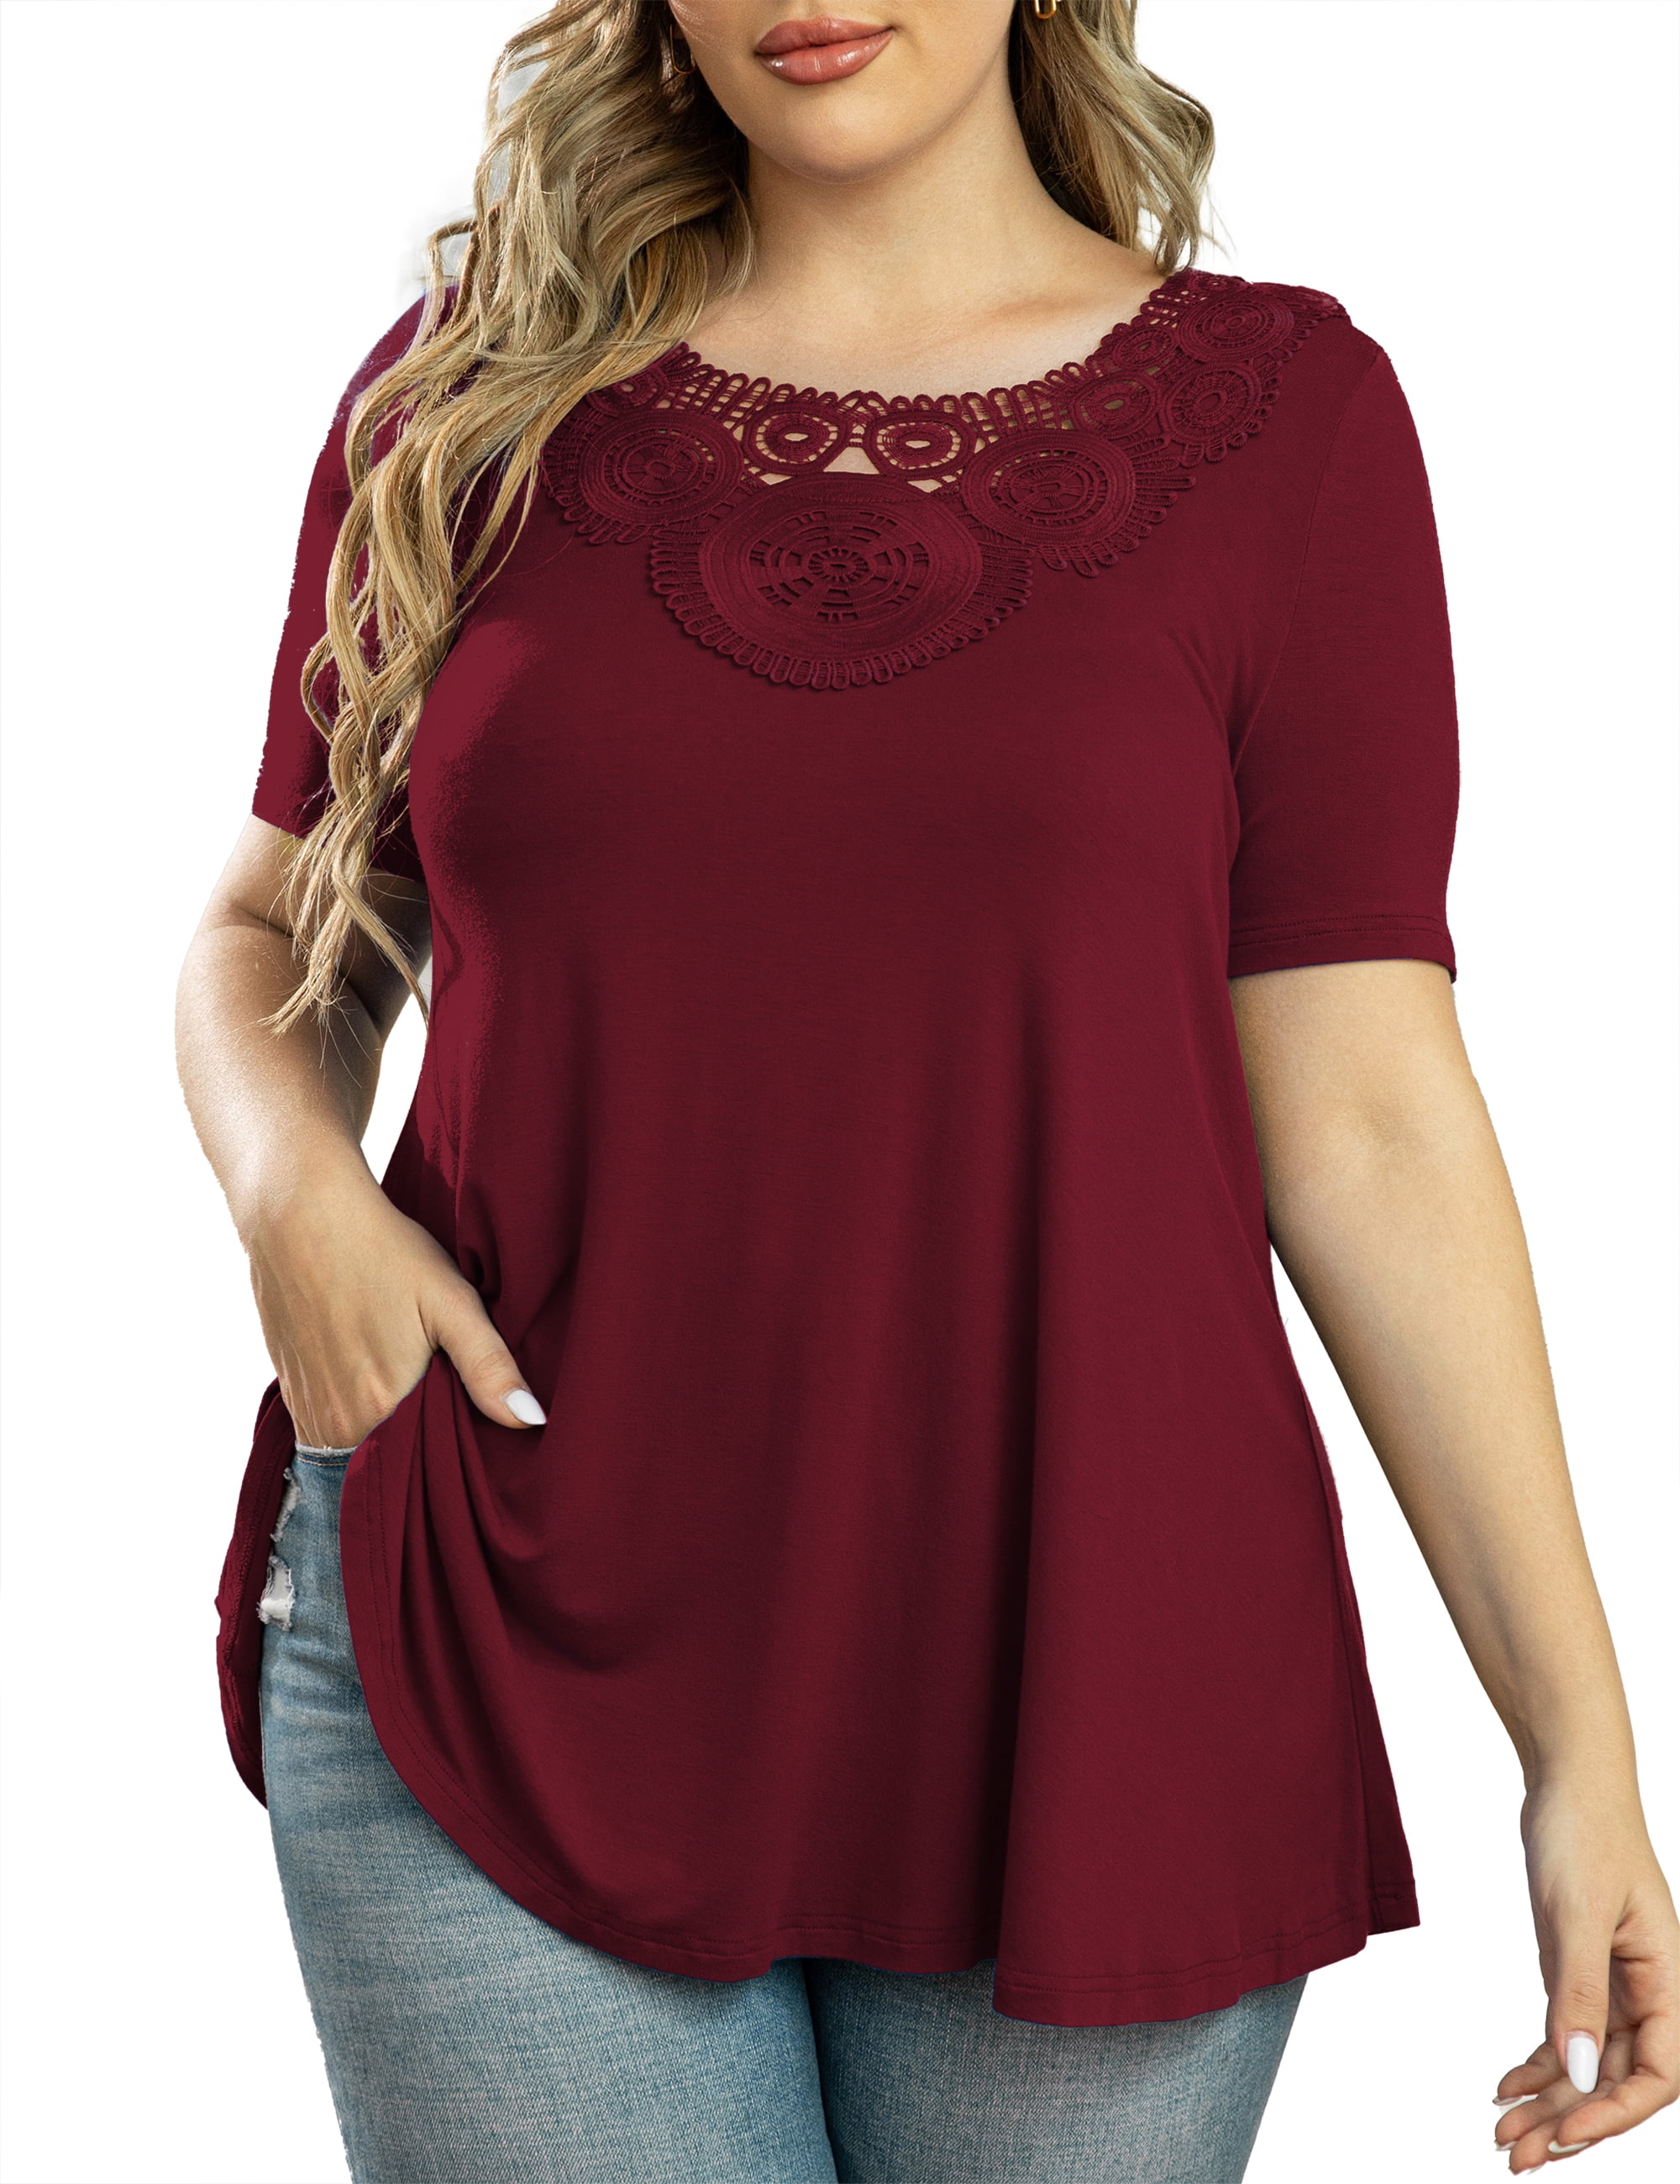 OmicGot Womens Plus Size Tops Short Sleeve Shirts Lace Pleated Tunic ...